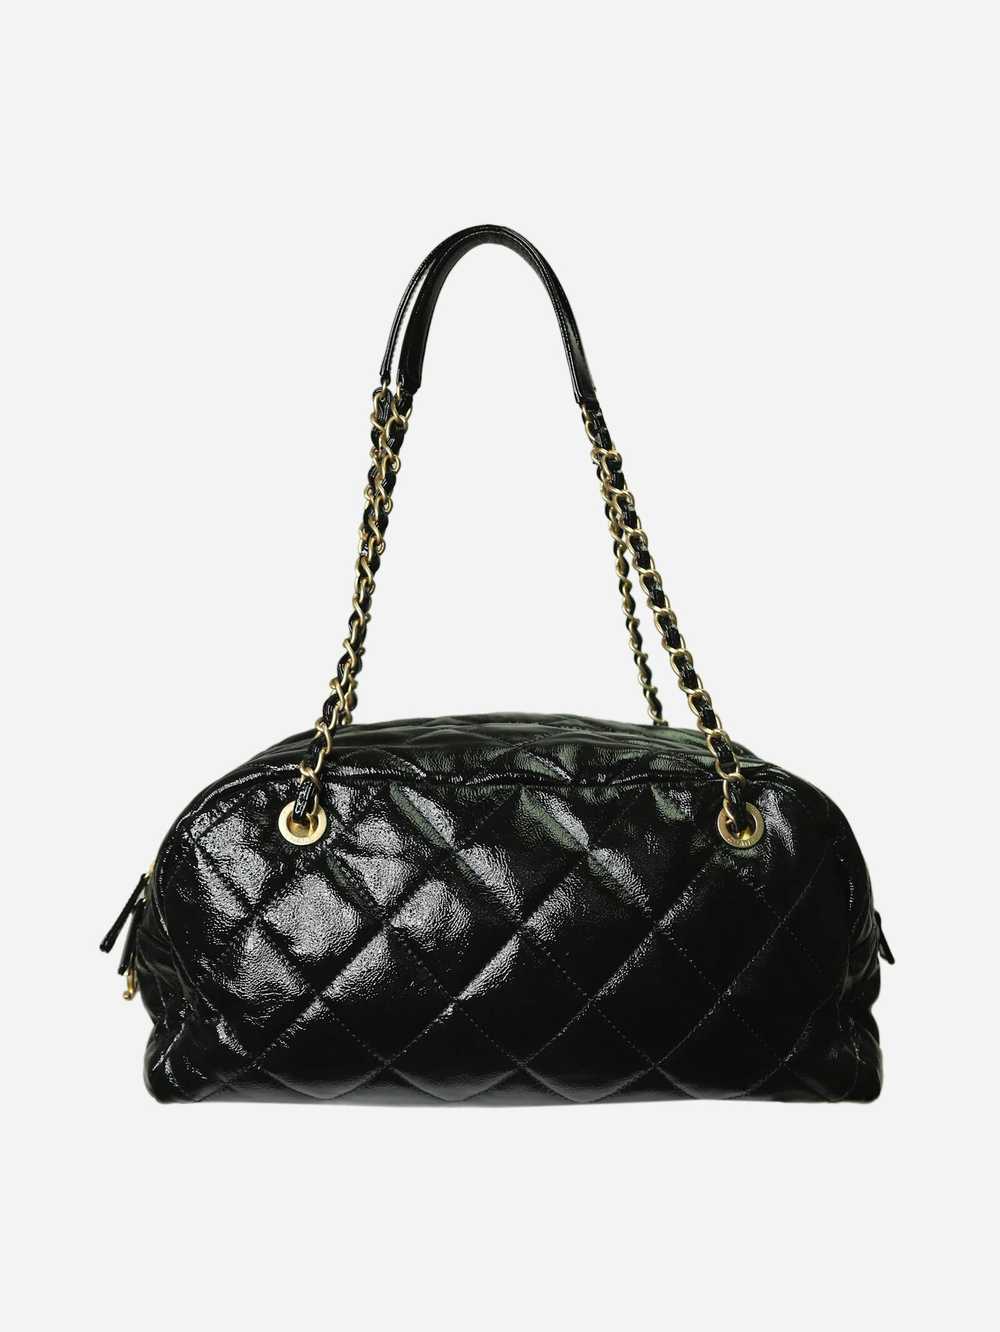 Chanel Black 2020 patent leather bowling bag - image 1